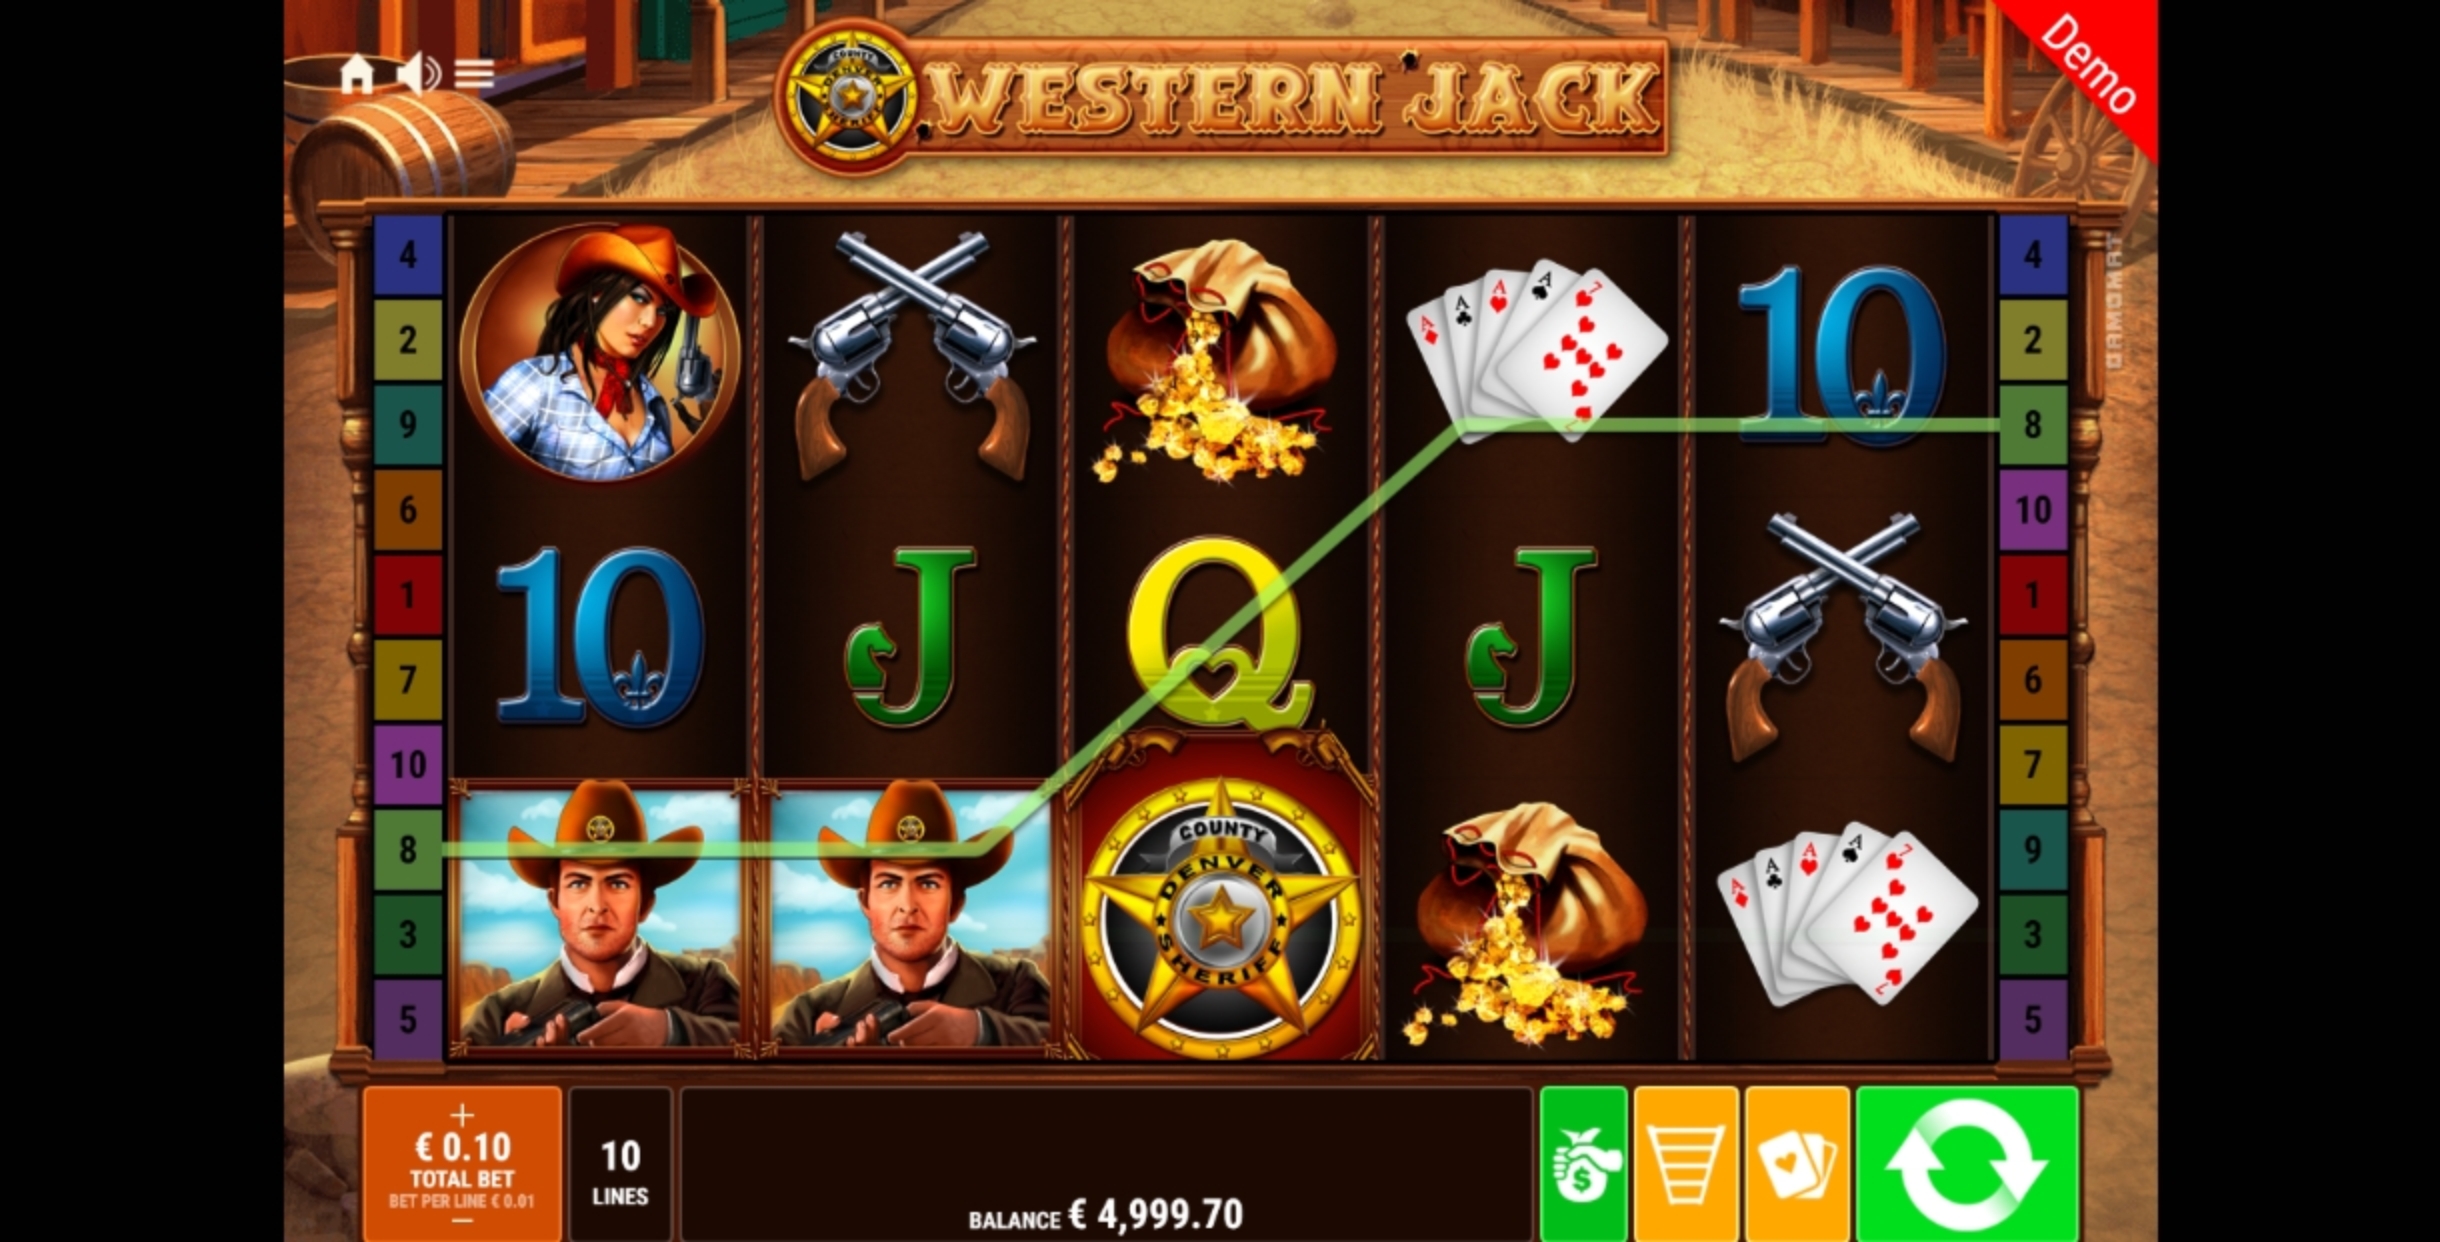 Win Money in Western Jack Free Slot Game by Gamomat